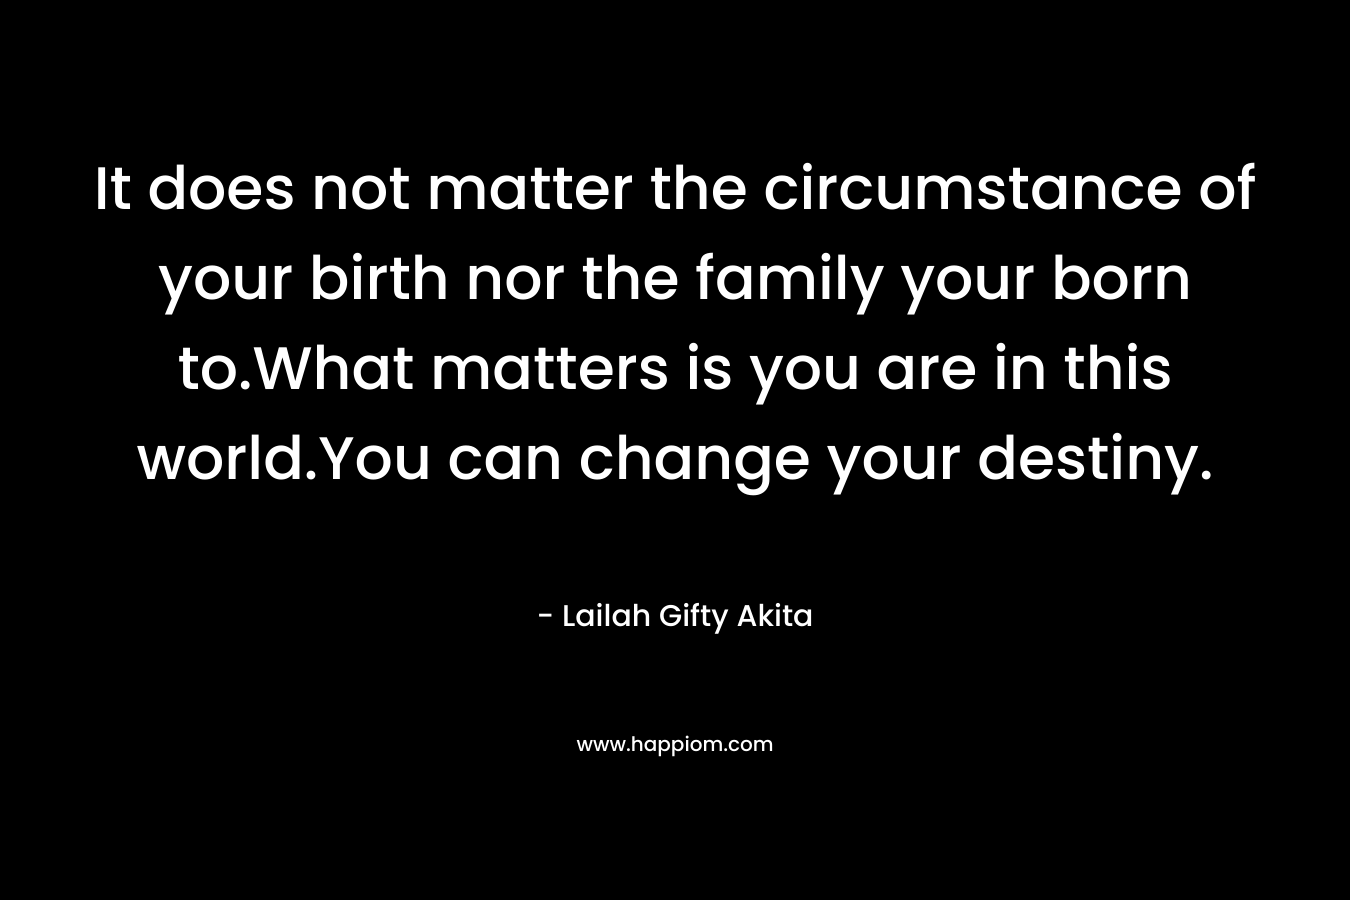 It does not matter the circumstance of your birth nor the family your born to.What matters is you are in this world.You can change your destiny.